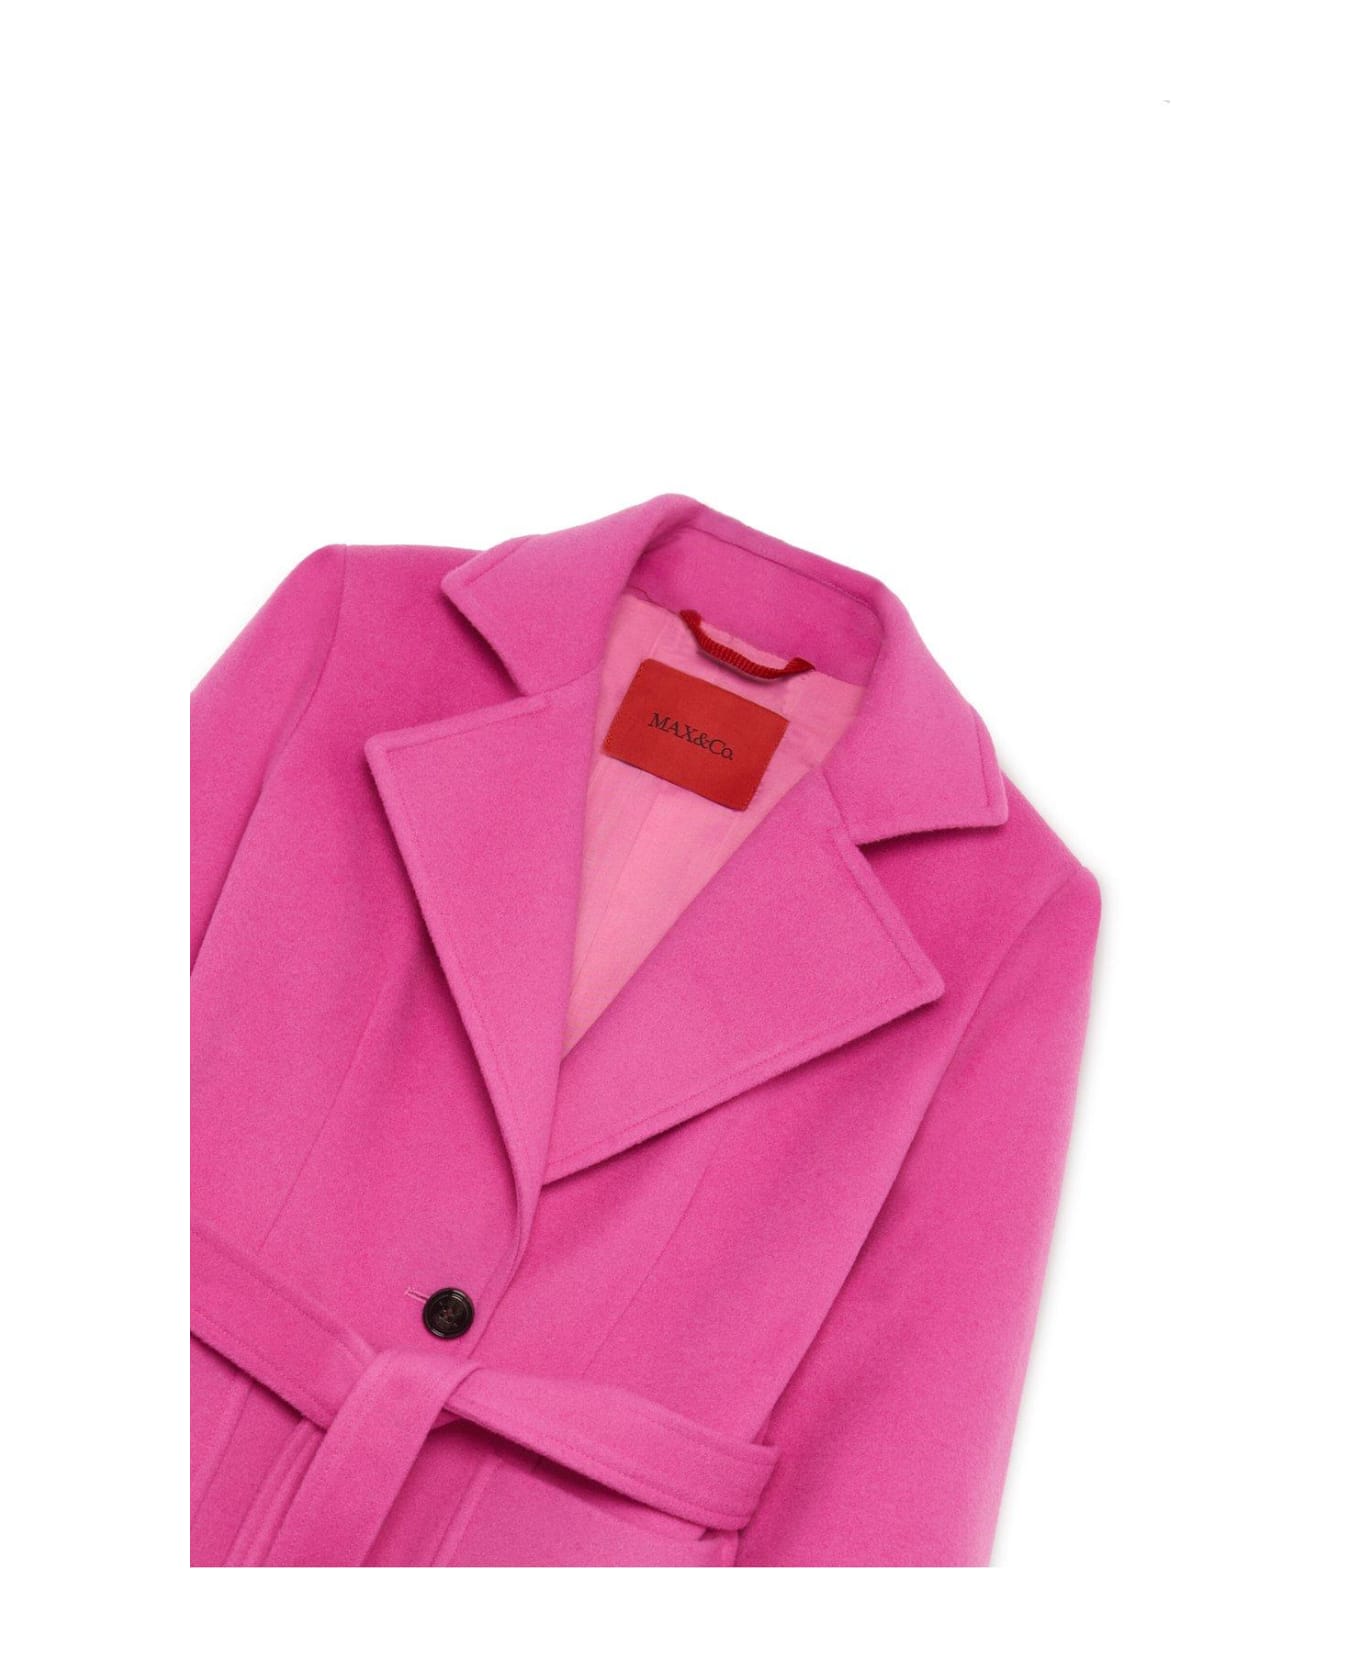 Max&Co. Belted Single-breasted Long Sleeevd Coat - Fucsia